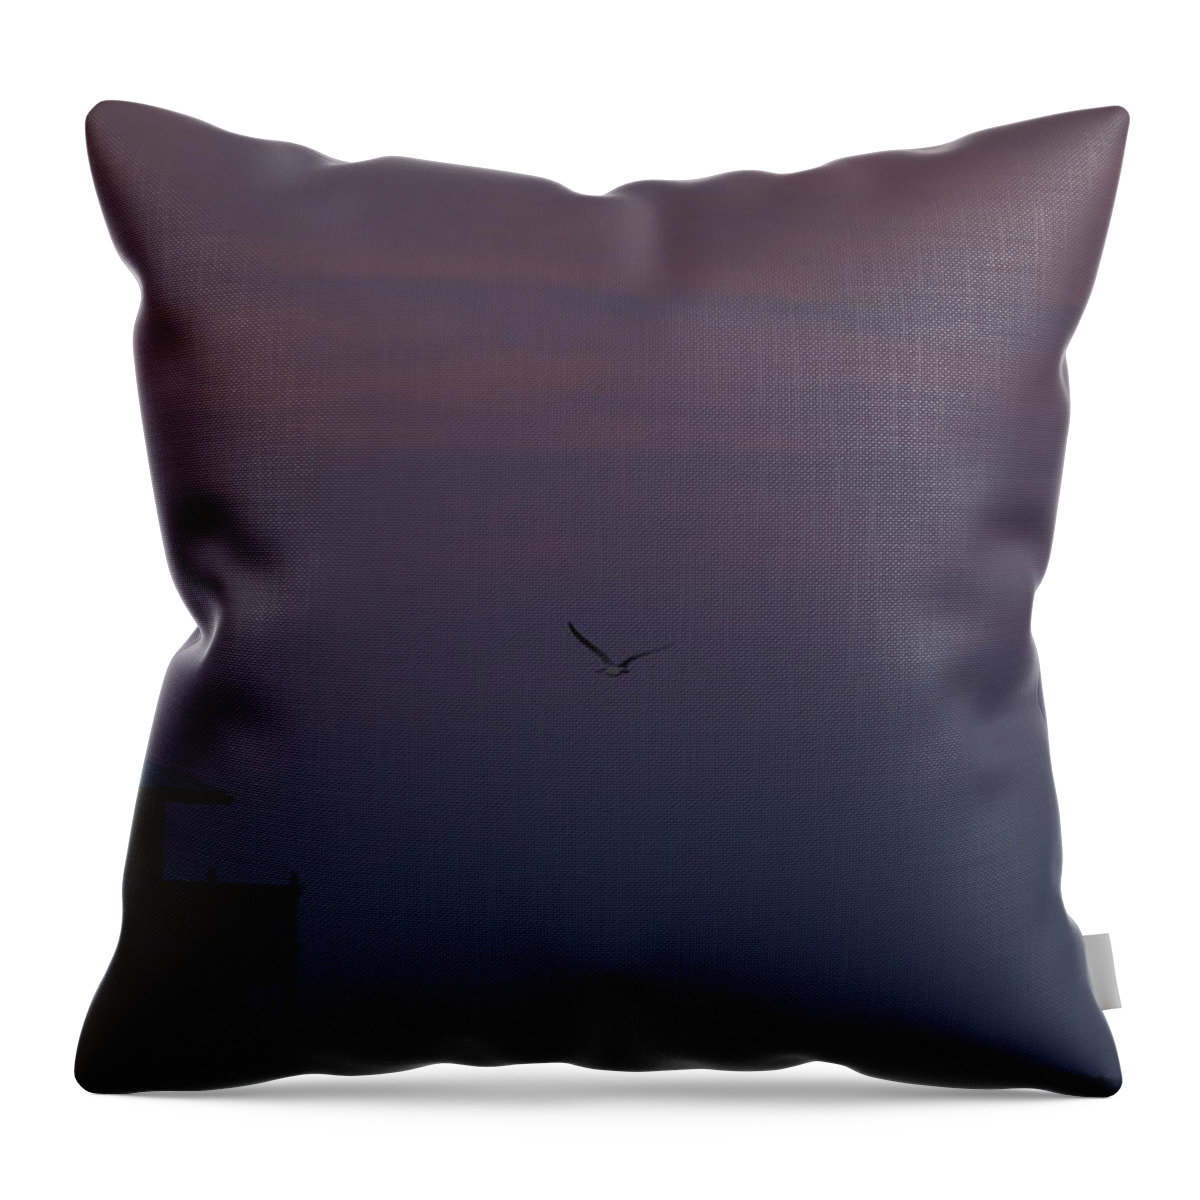 Pink Throw Pillow featuring the photograph In the Still of Dusk by Nancy Dinsmore